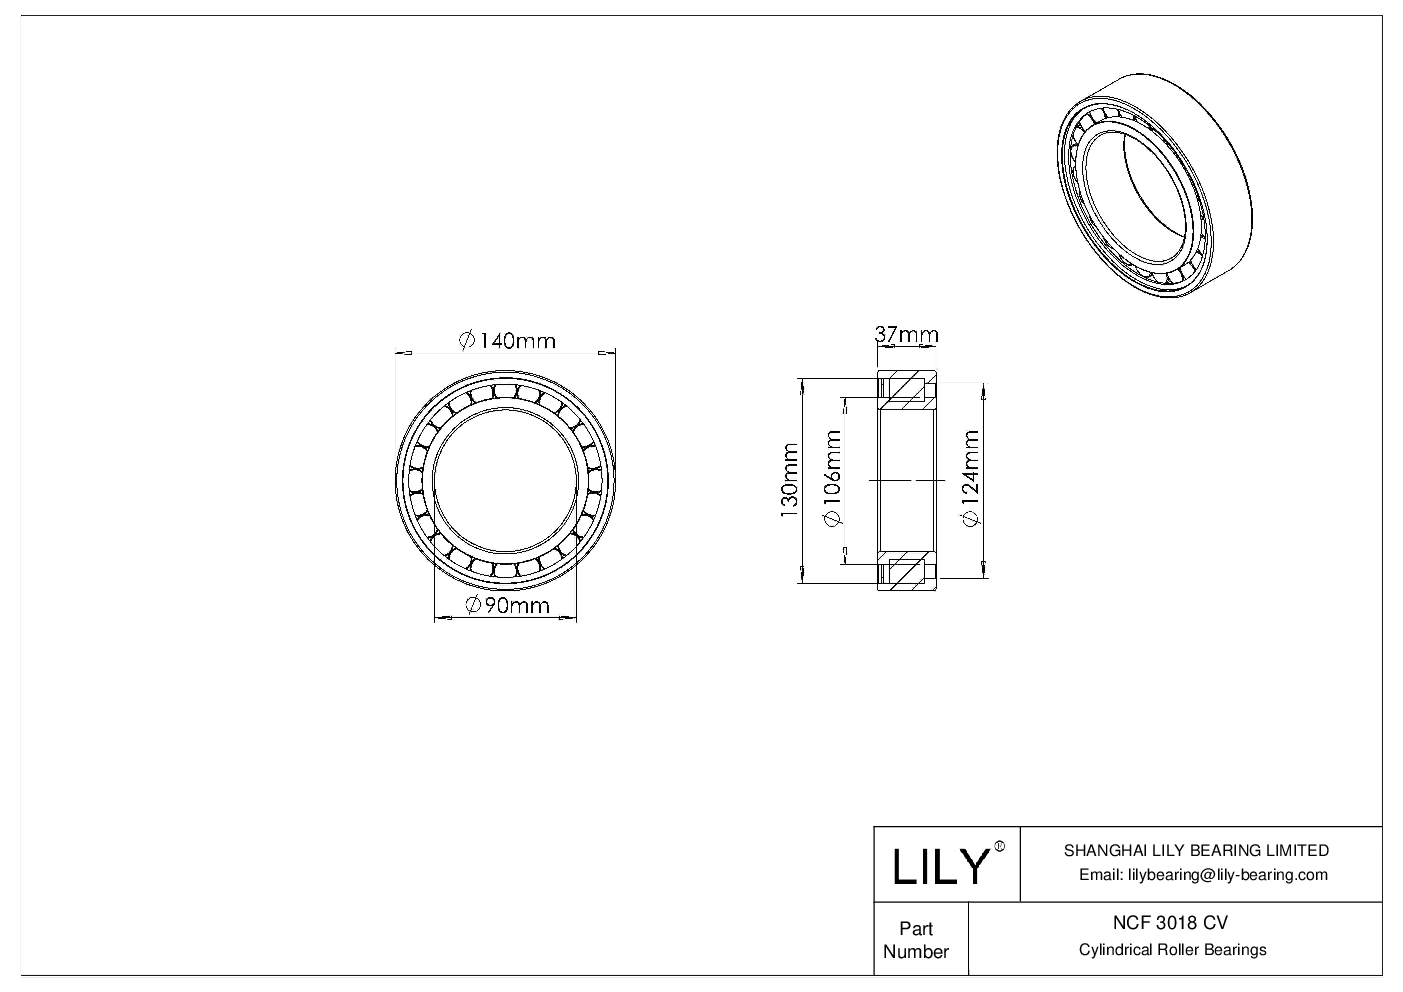 NCF 3018 CV Single Row Full Complement Cylindrical Roller Bearings cad drawing